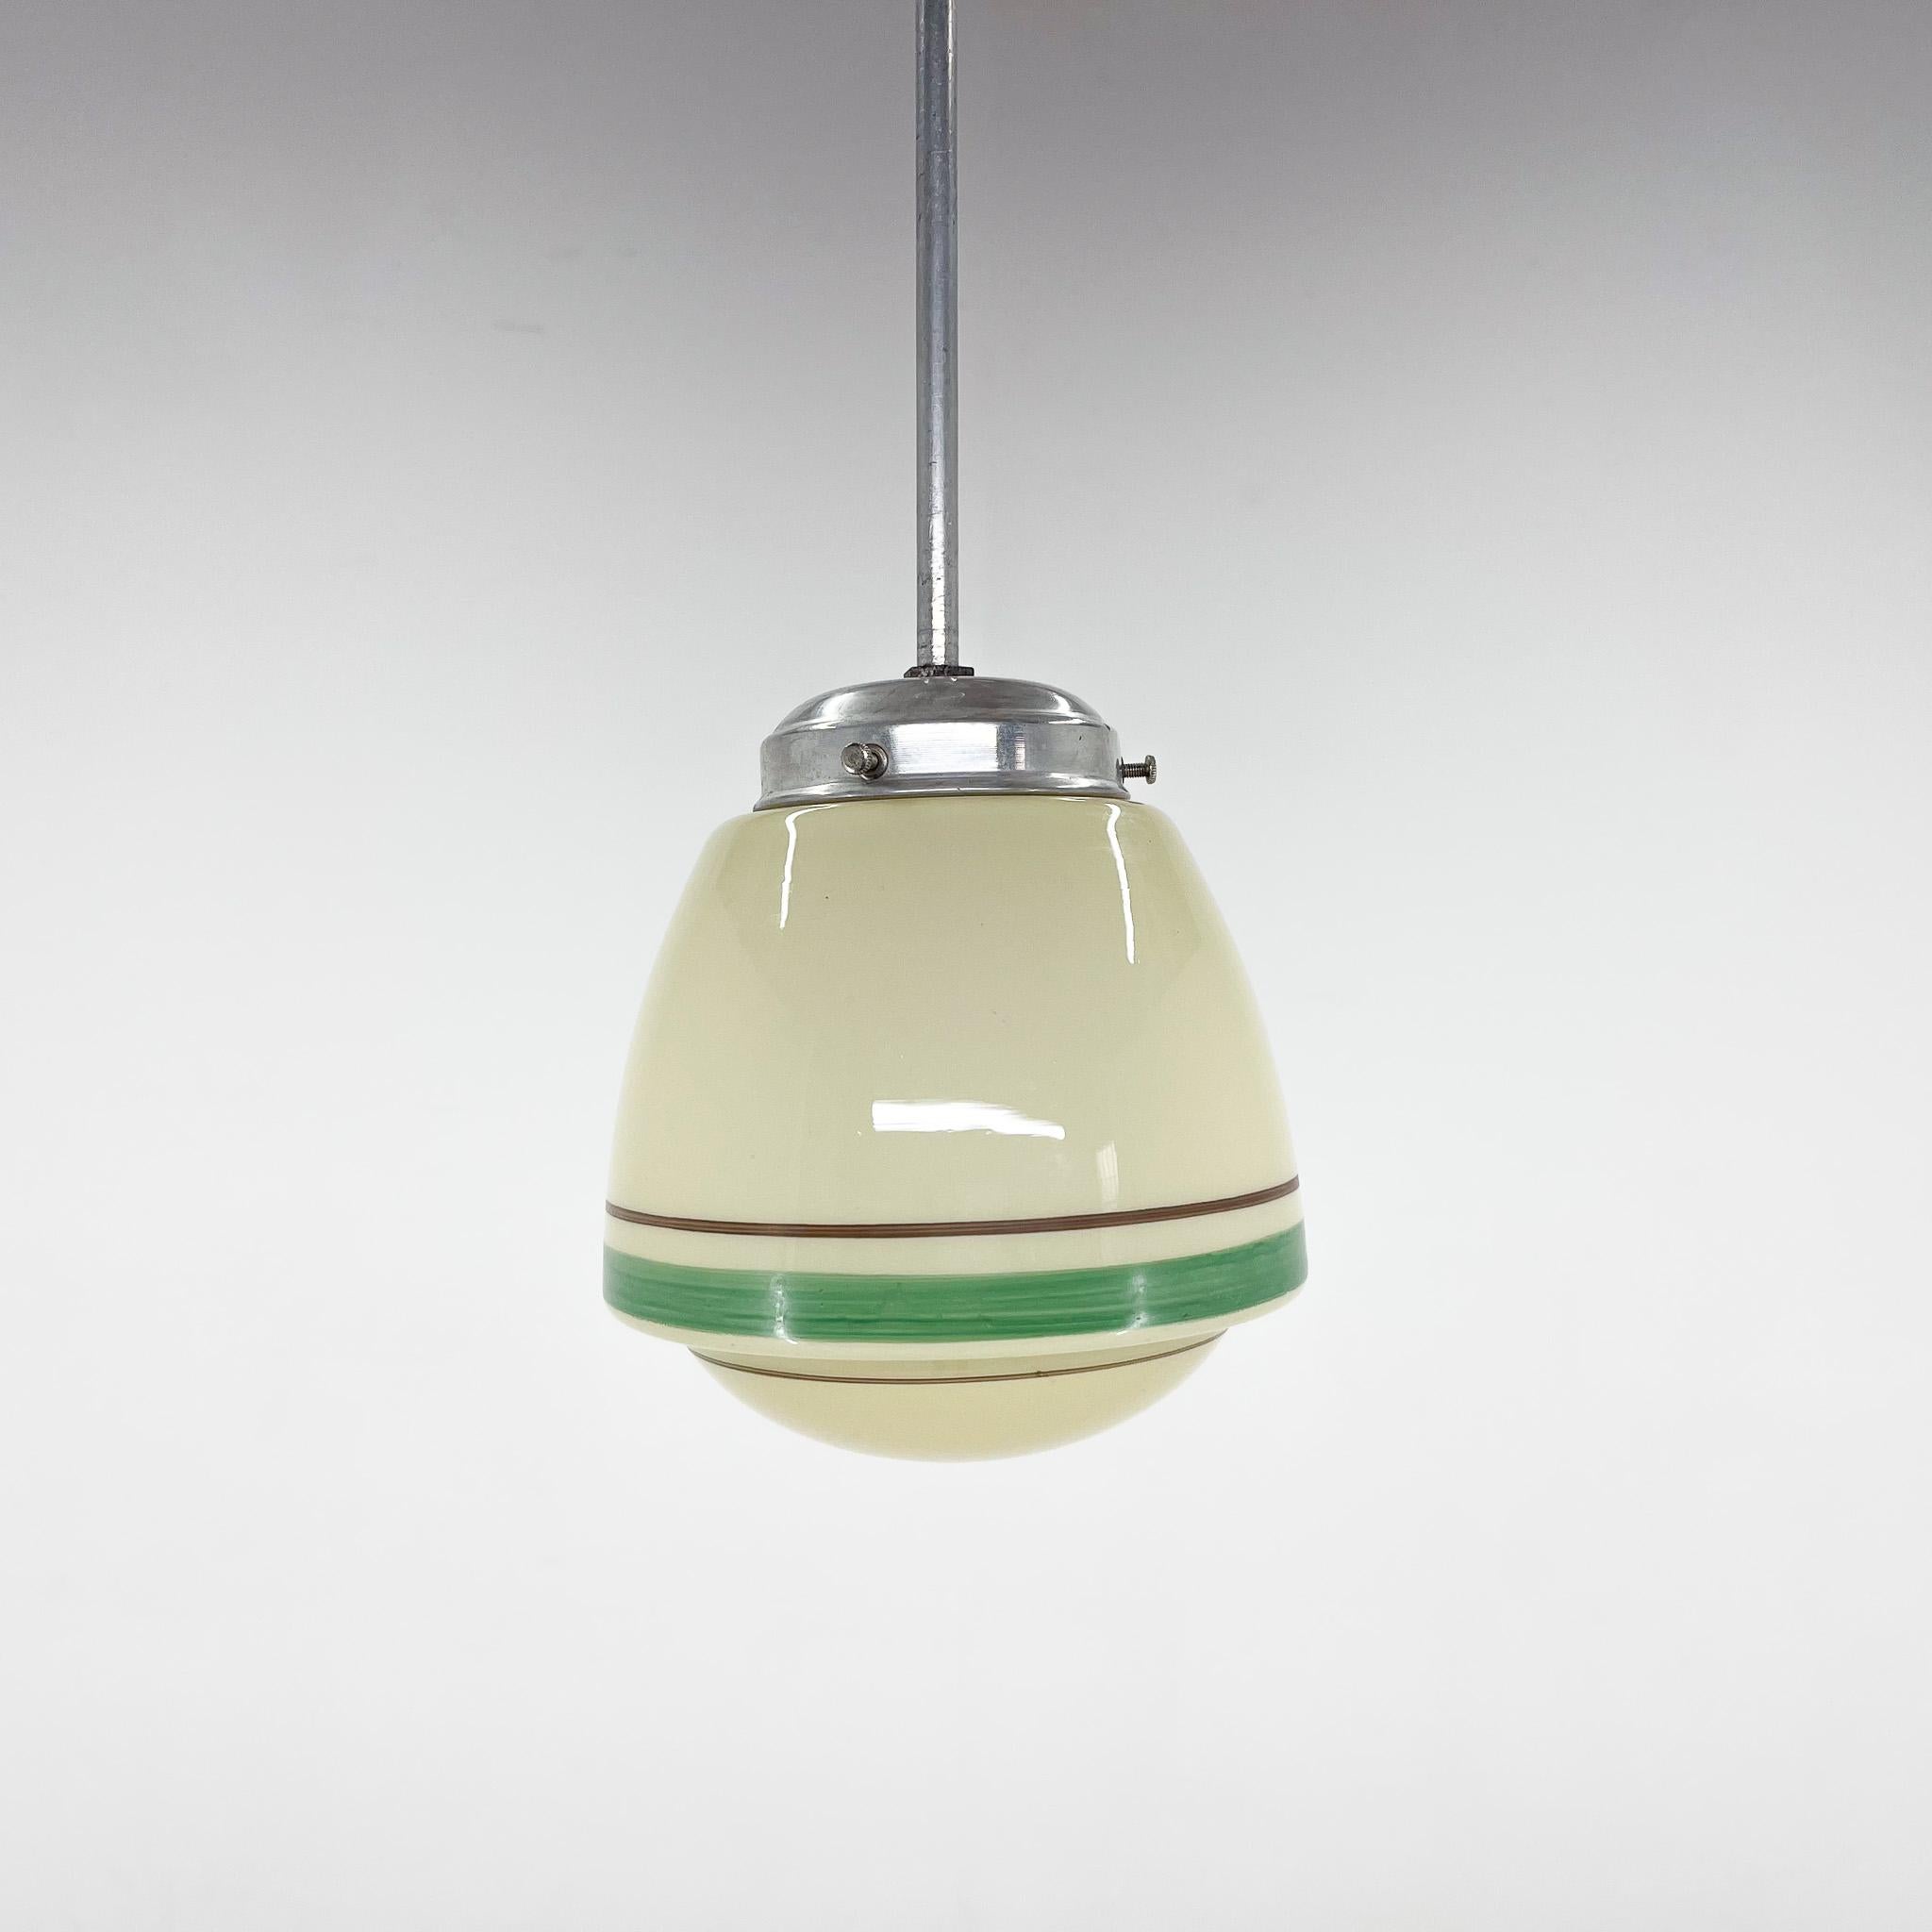 Small art deco pendant light with hand painted glass. Made in former Czechoslovakia in the 1930s.